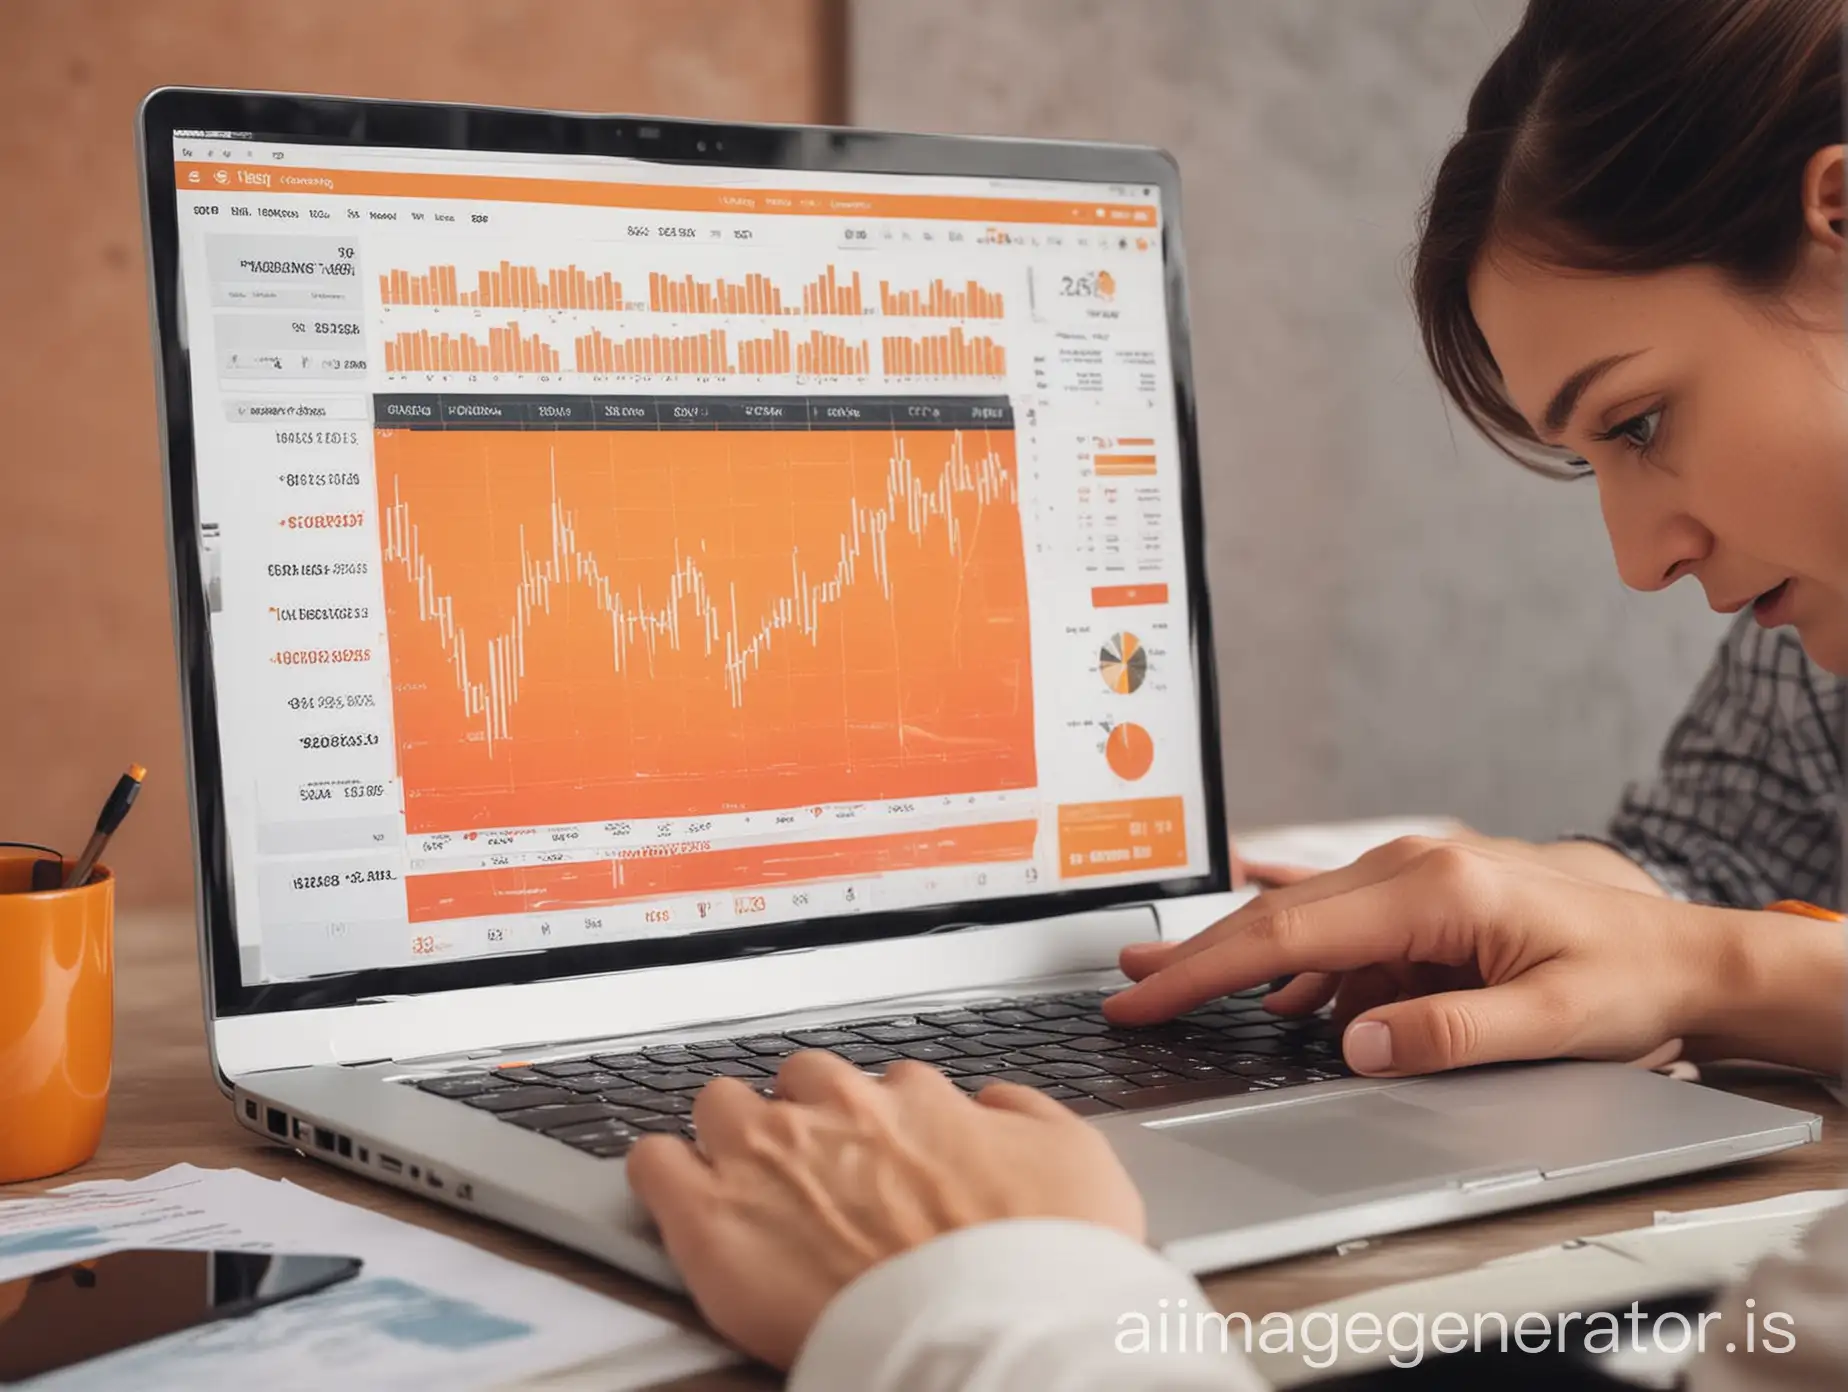 people frustrated looking on their laptop with laptop screen showing finance, money and chart. in color white and orange